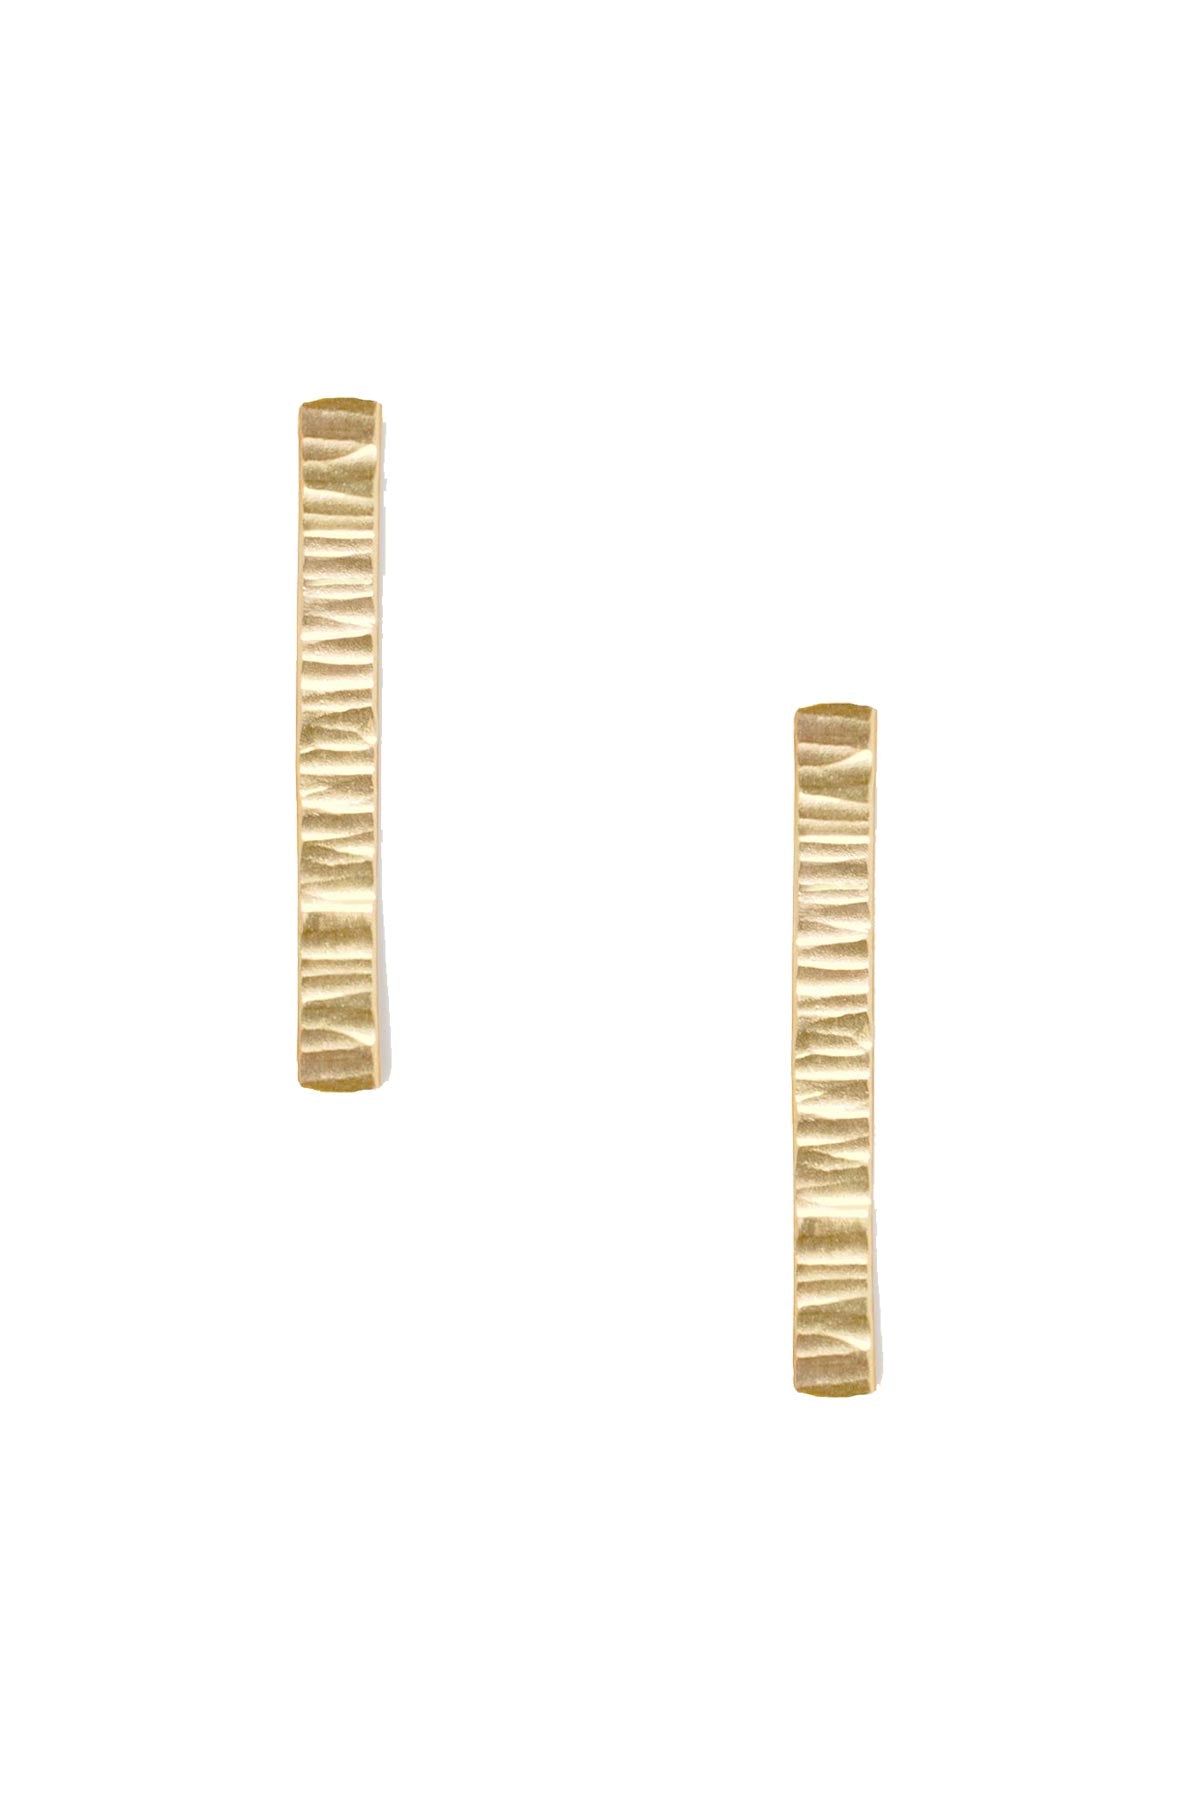 Able - Luxe Beam Stud Earrings - Gold